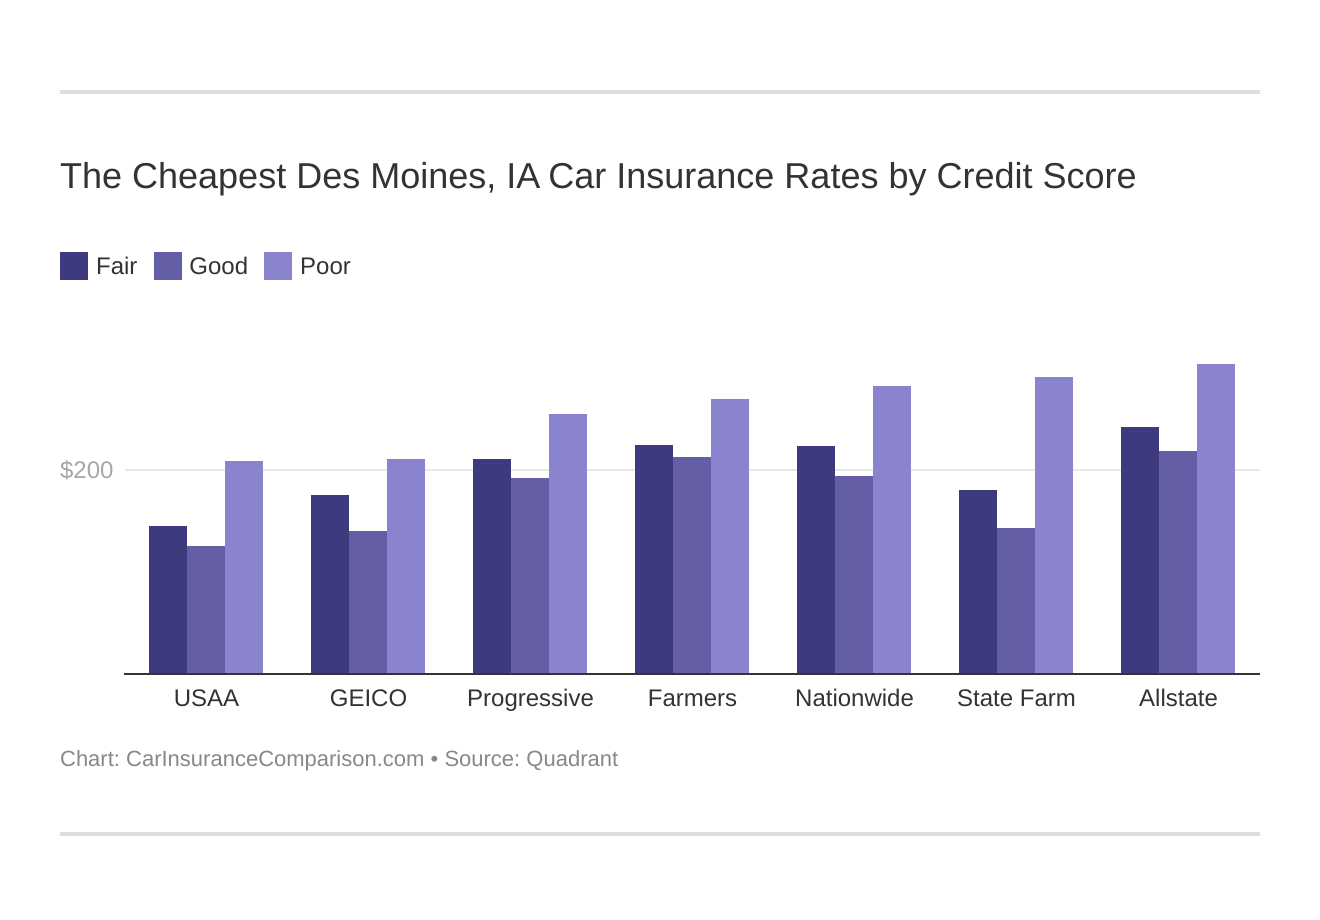 The Cheapest Des Moines, IA Car Insurance Rates by Credit Score